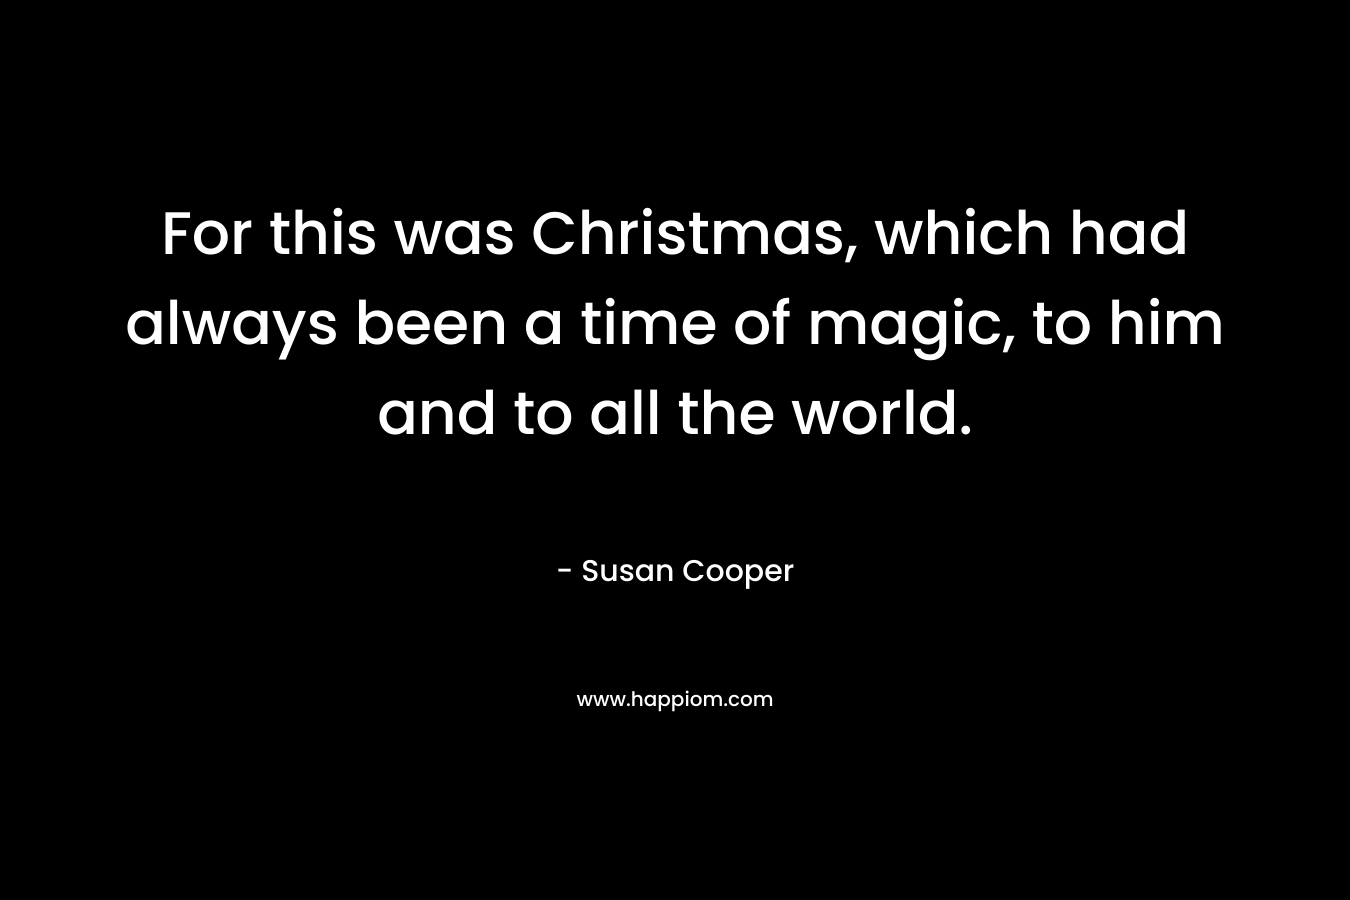 For this was Christmas, which had always been a time of magic, to him and to all the world.